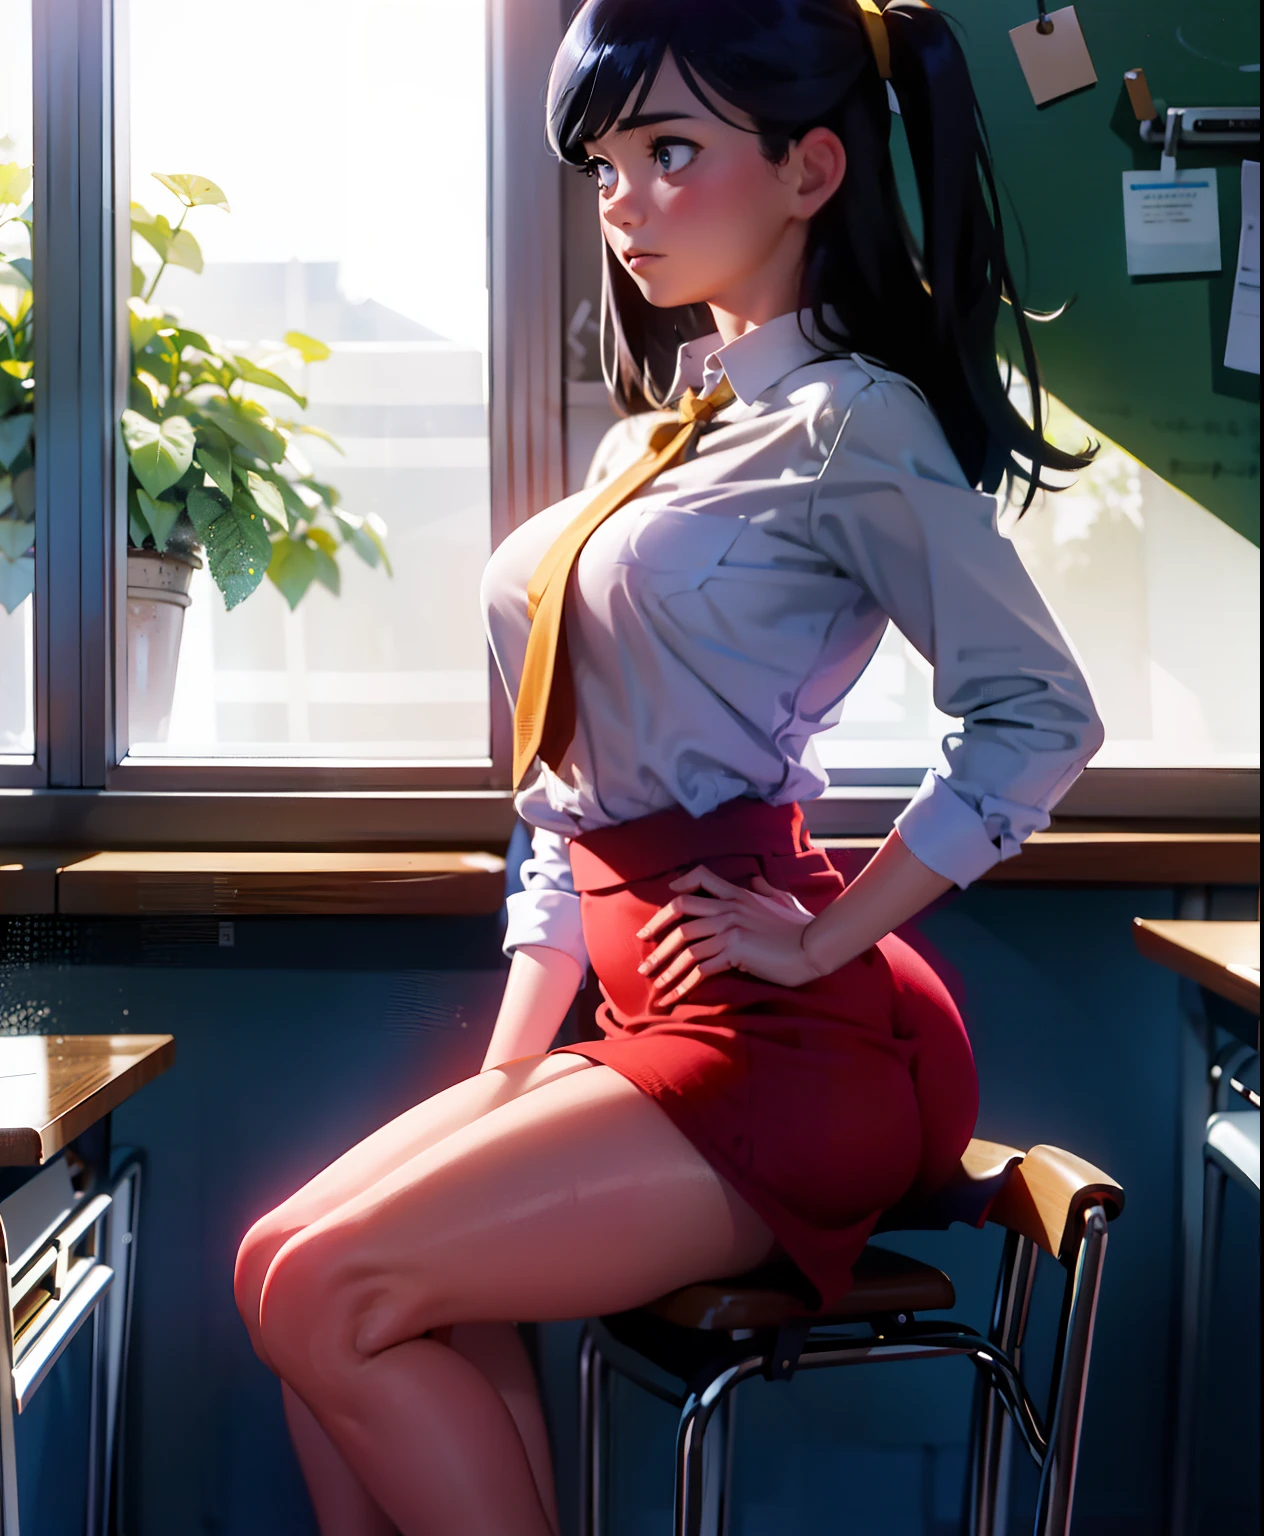 (best quality,highres),thick,shy girl sitting in a classroom, in , beautiful detailed eyes and face, long eyelashes, pensive expression, diligently doing school work. Crisp focus on the girl, capturing her intricate features and the fine details of her face. Soft lighting illuminates the classroom, creating a serene and tranquil atmosphere. The girl's thick figure is accentuated by the way she sits, exuding a gentle presence. The artwork exhibits a realistic style, with vivid colors and a warm color palette that adds depth to the scene. The girl's shy demeanor is complemented by her posture, slightly hunched over her books, immersed in her studies. The classroom is filled with academic paraphernalia, including textbooks, papers, and a chalkboard in the background, emphasizing the educational setting. Overall, the artwork portrays a peaceful moment of a self-conscious girl engrossed in her studies, inviting viewers to appreciate the beauty of academia and the individuality of each student, super thick, revealing clothes, hentai pic, giant ass, young 20 of age,